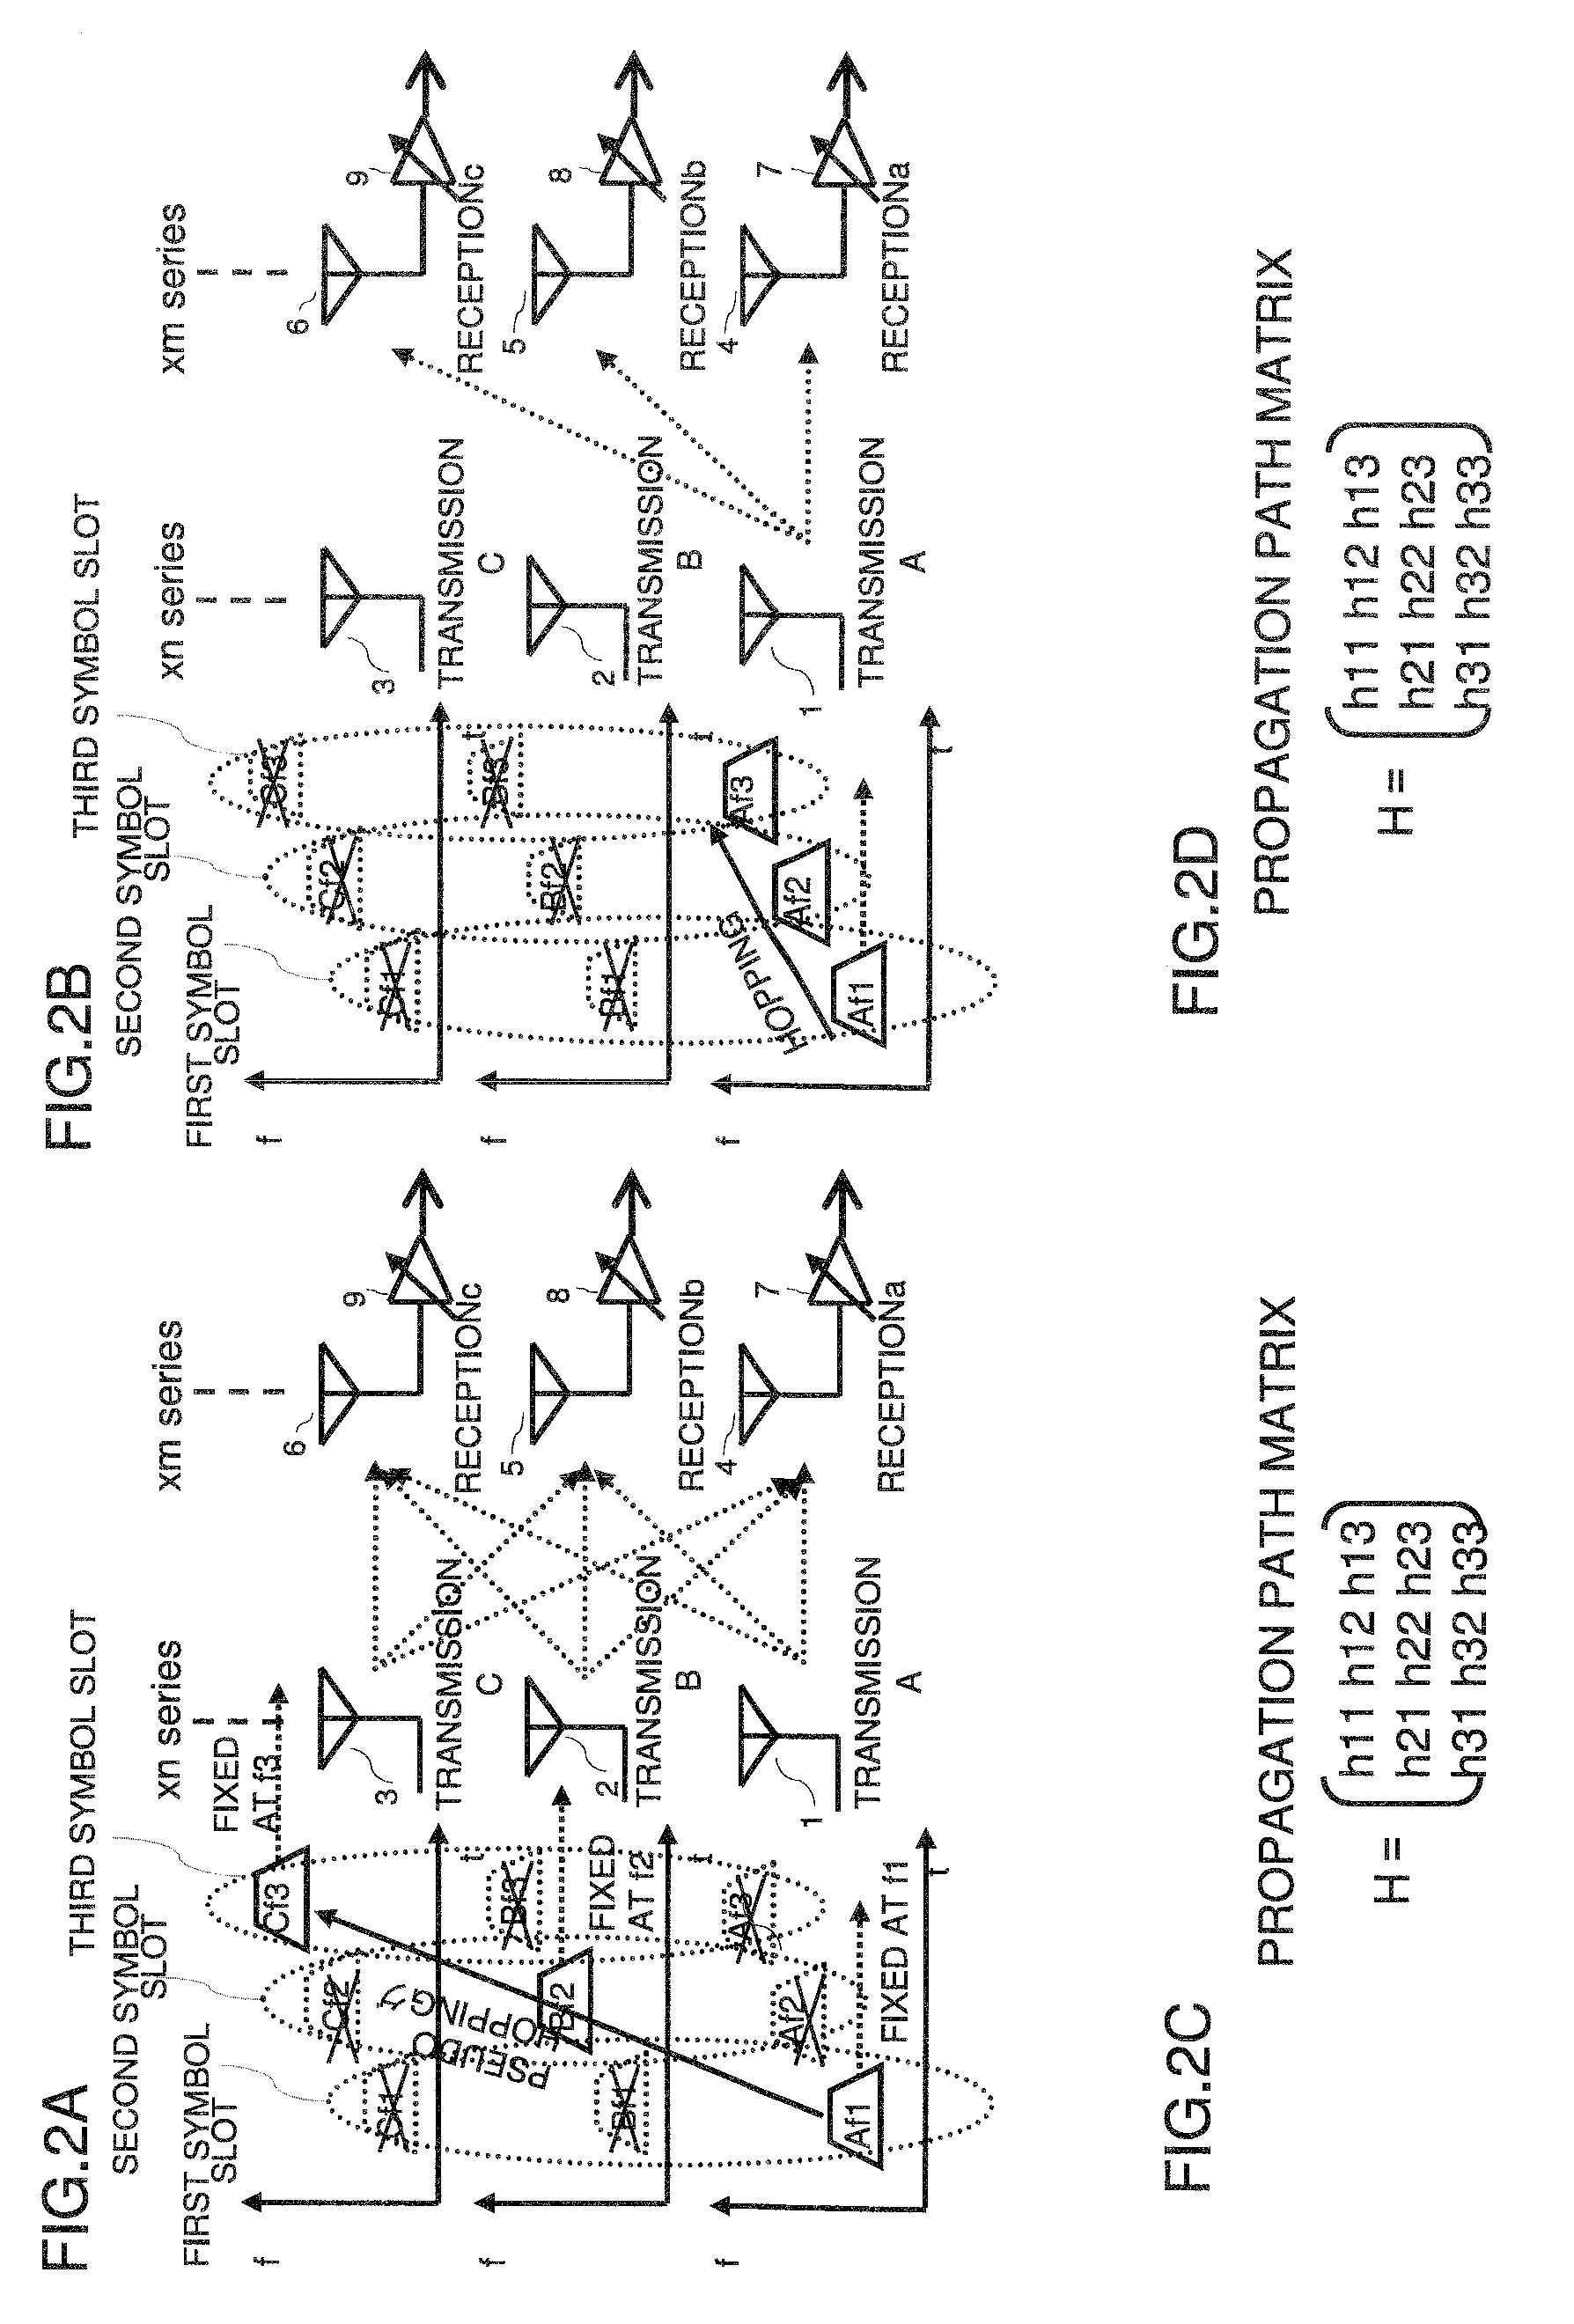 Wireless communication apparatus and a reception method involving frequency hopping